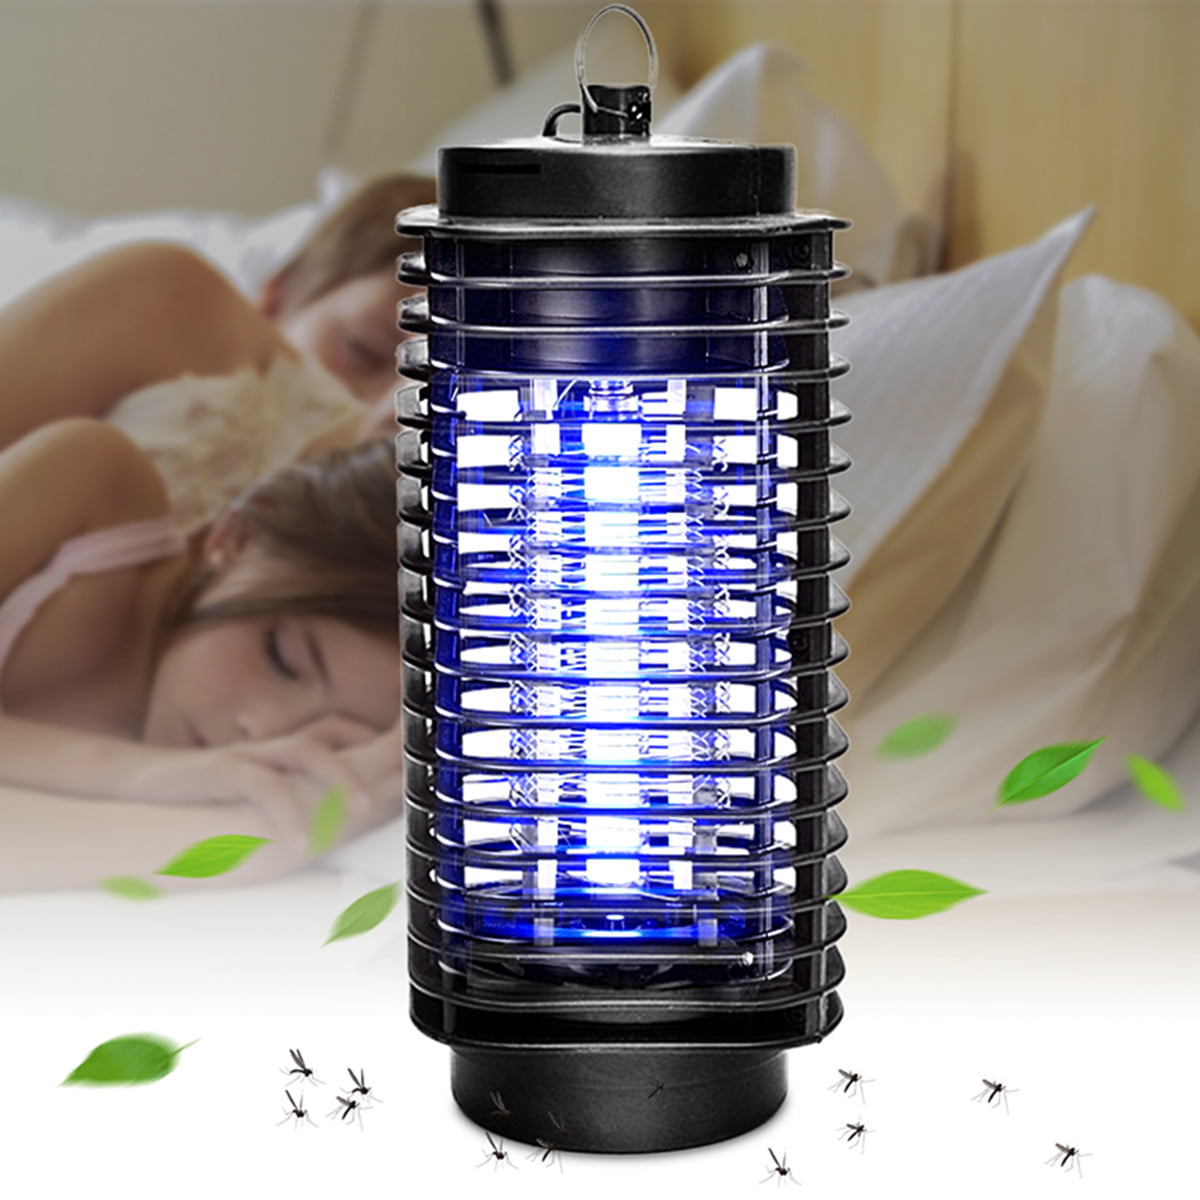 LED Trap Catch Lamp Electric 110V Mosquito Killer Light Insect Zapper Eliminator 